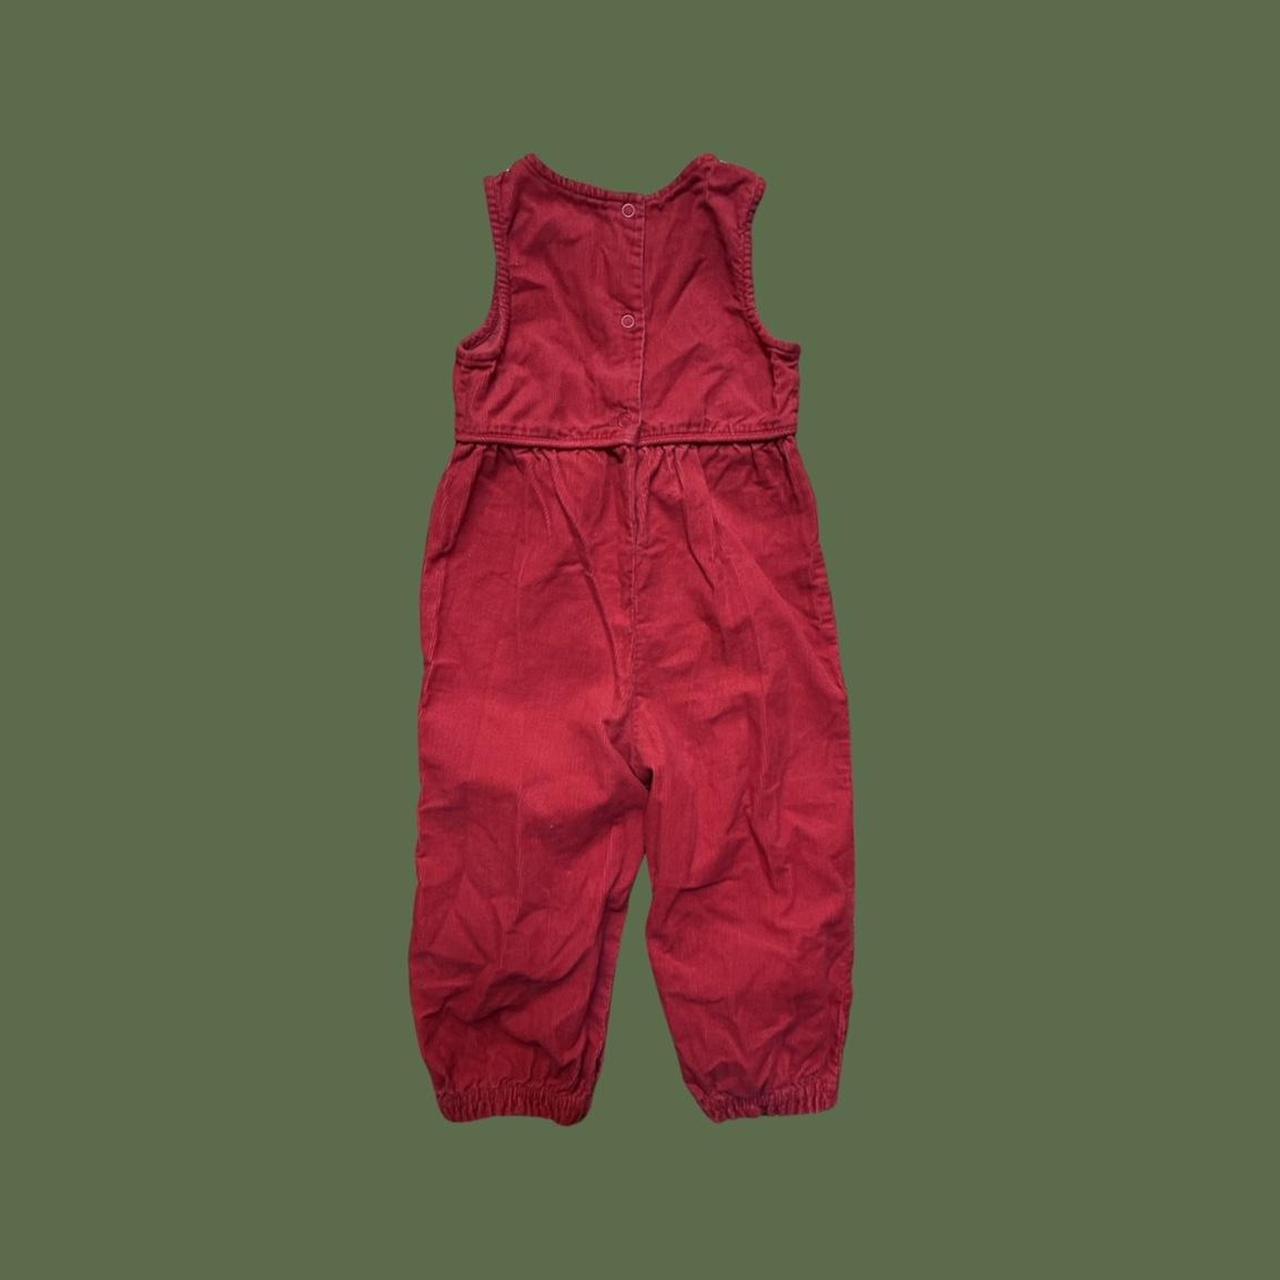 Gymboree Red and White Jumpsuit (2)